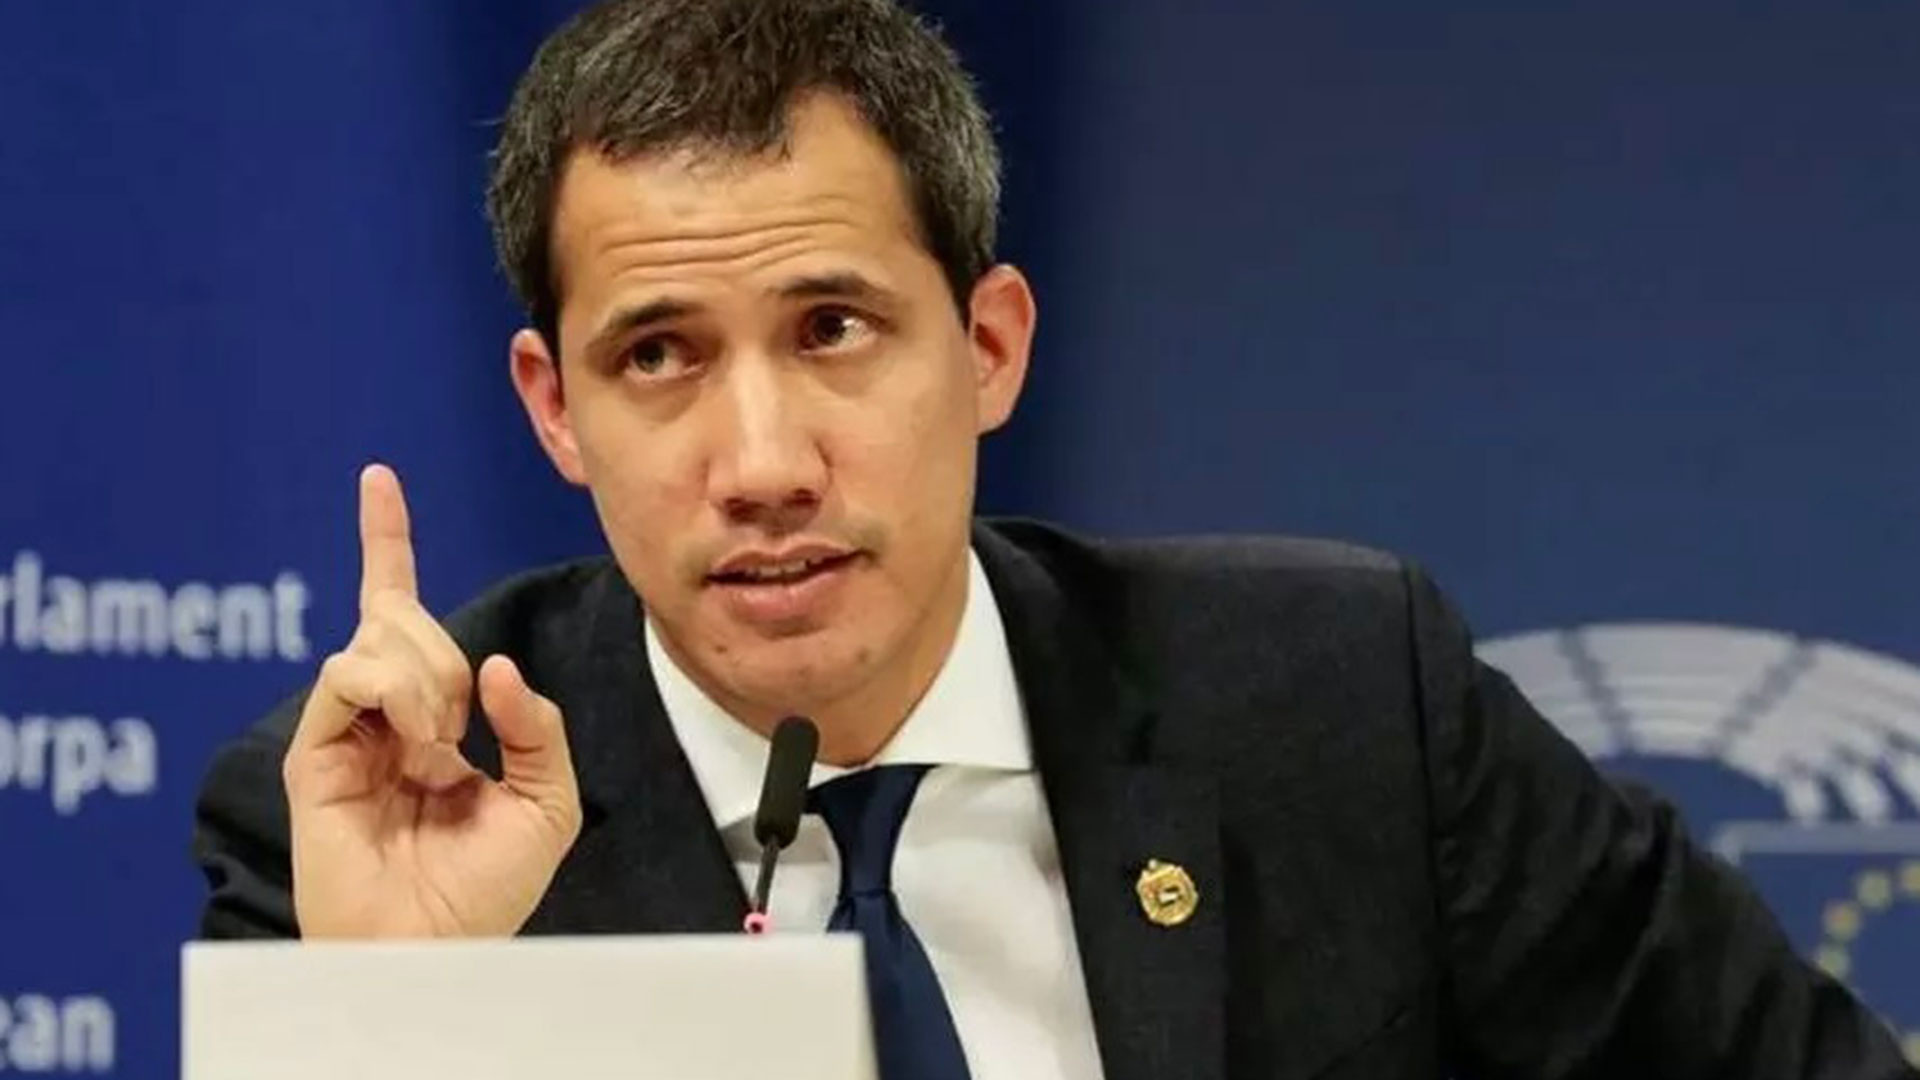 Guaidó indicated that with this decision taken, the task ahead is to recompose the opposition unit, in view of primary elections scheduled for next year, in which a candidate will be chosen to face the Madurista regime in the 2024 presidential elections. .